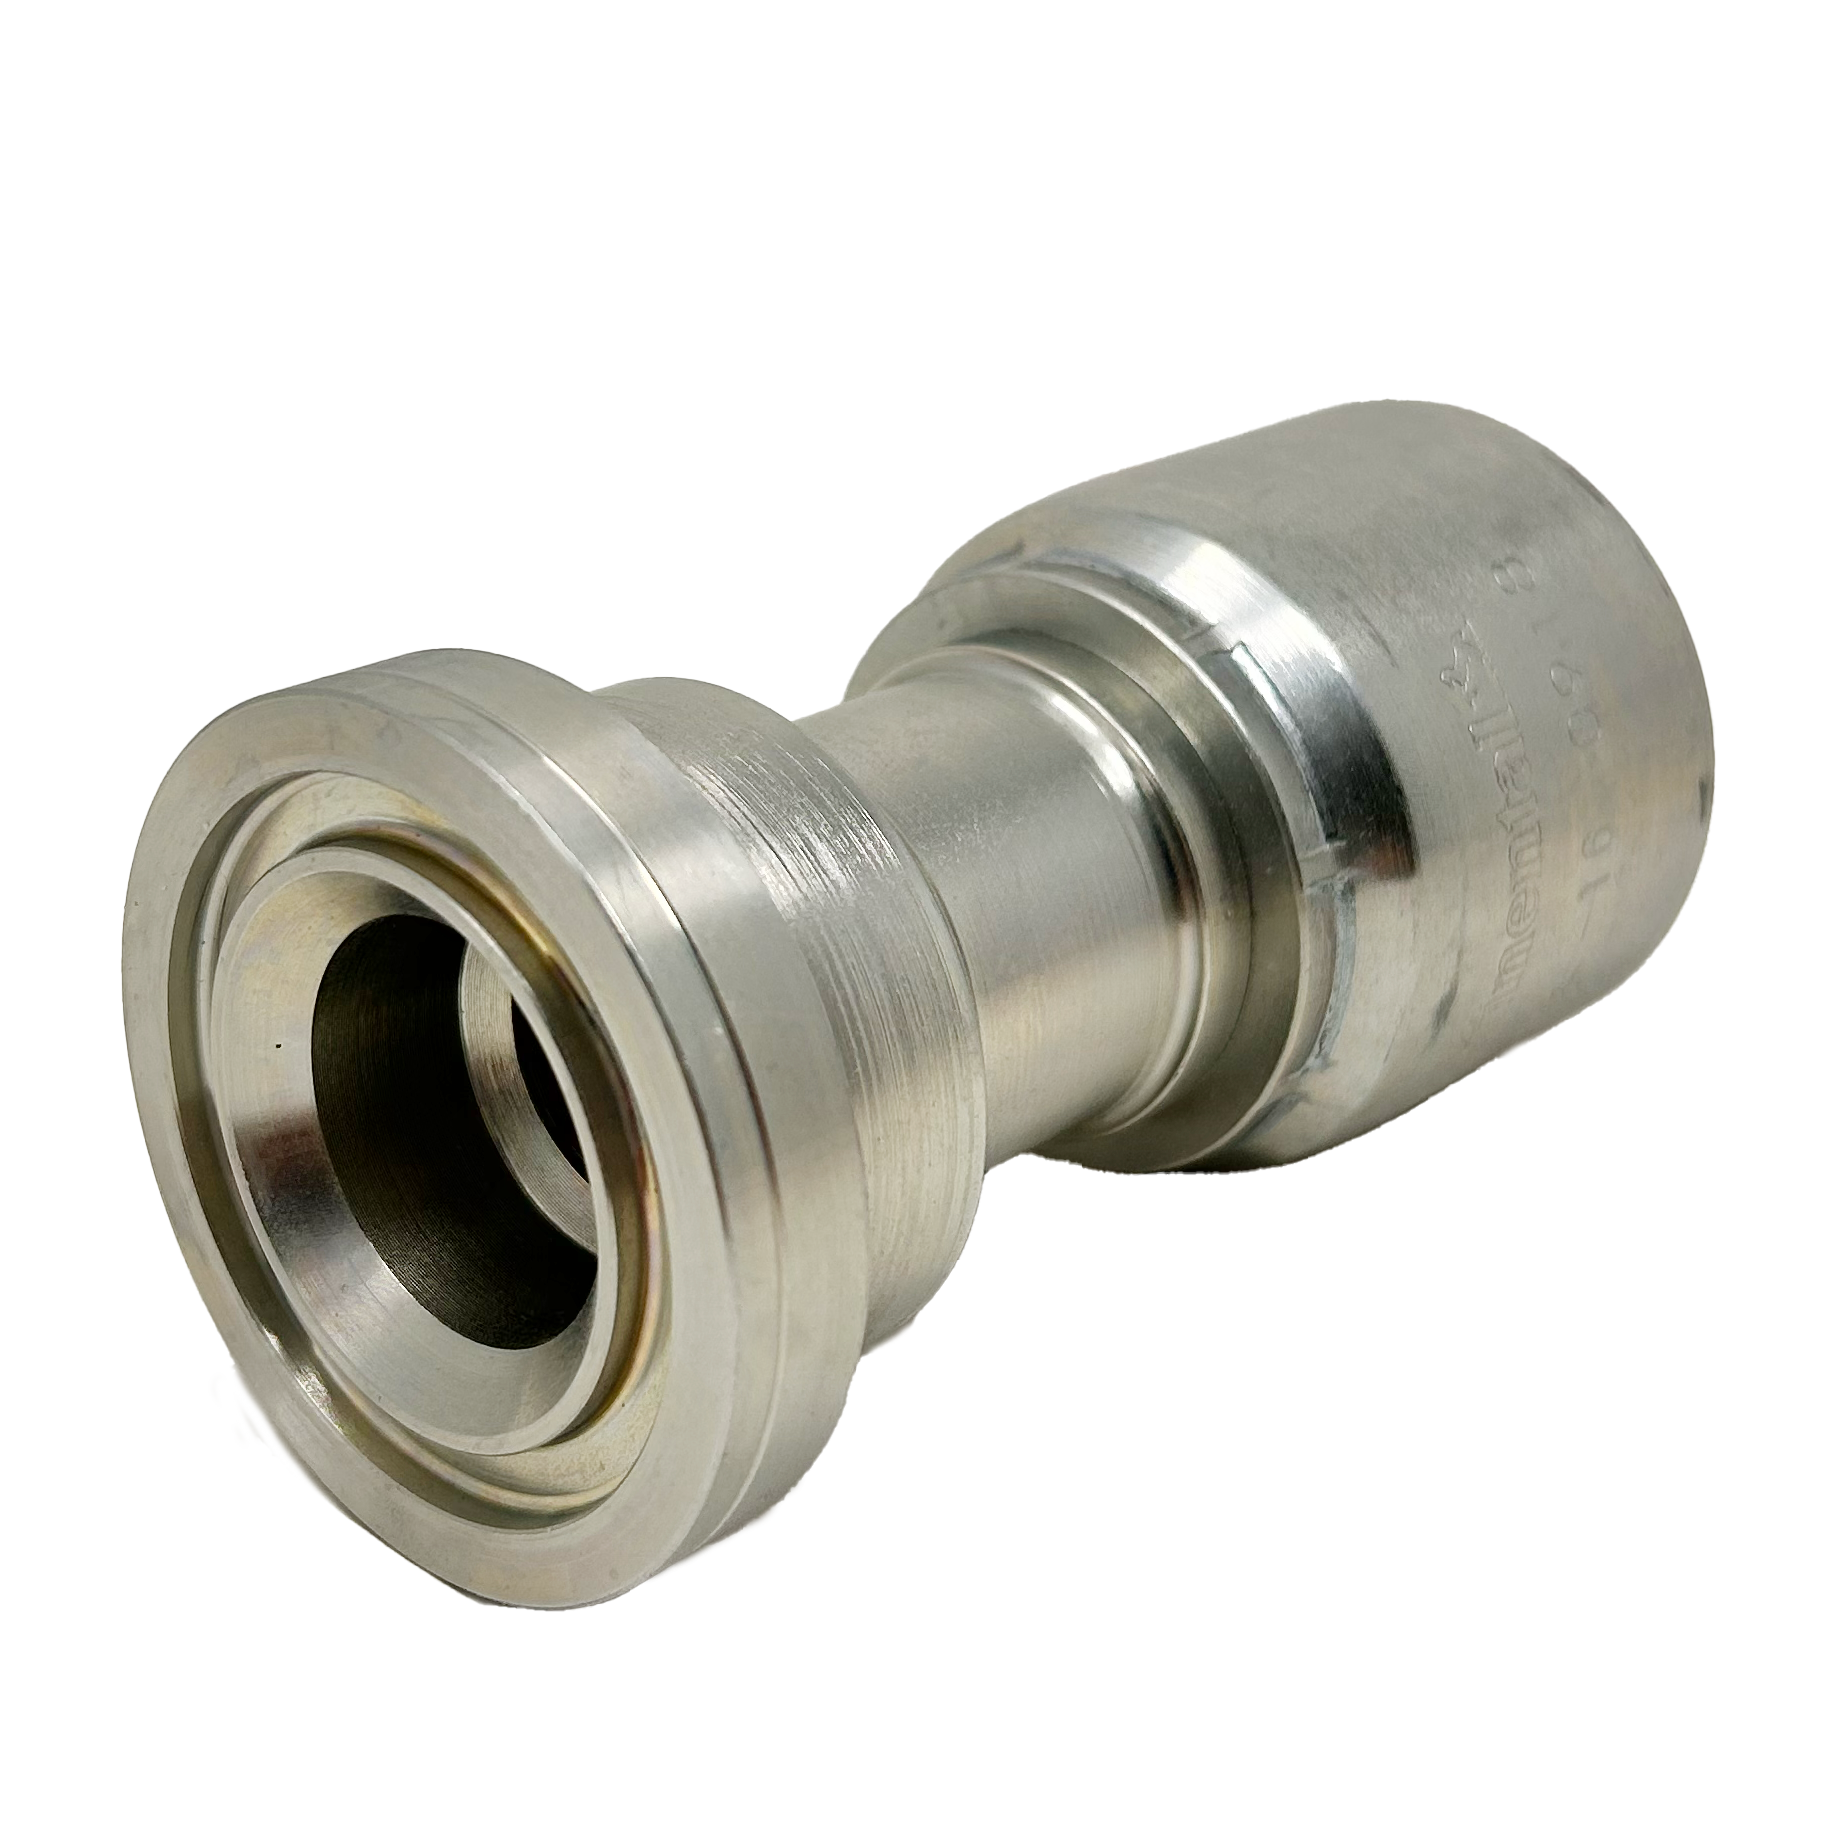 B2-FH-2024: Continental Hose Fitting, 1.25 (1-1/4") Hose ID x 1.5 (1-1/2") Code 62, Straight Connection